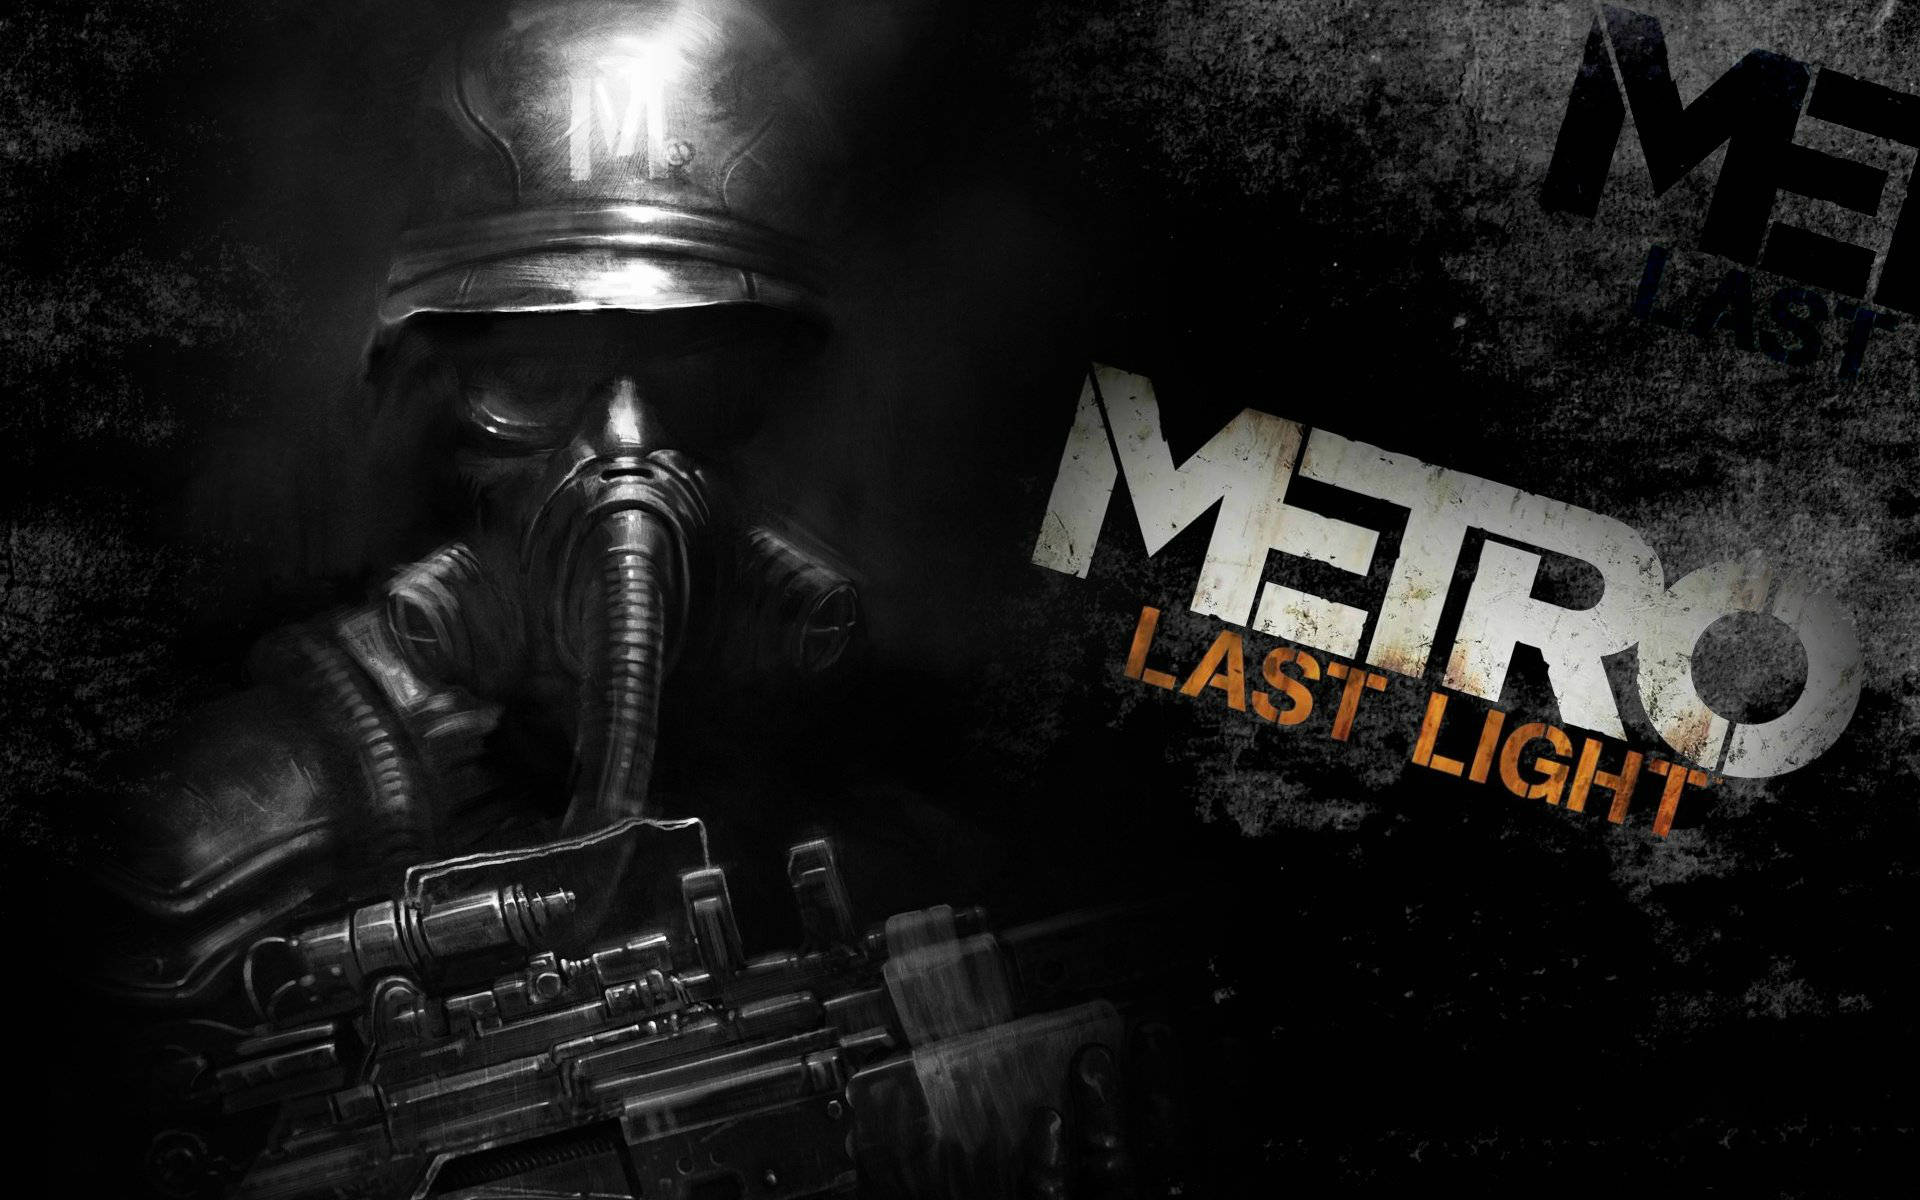 1920X1200 Metro Last Light Wallpaper and Background